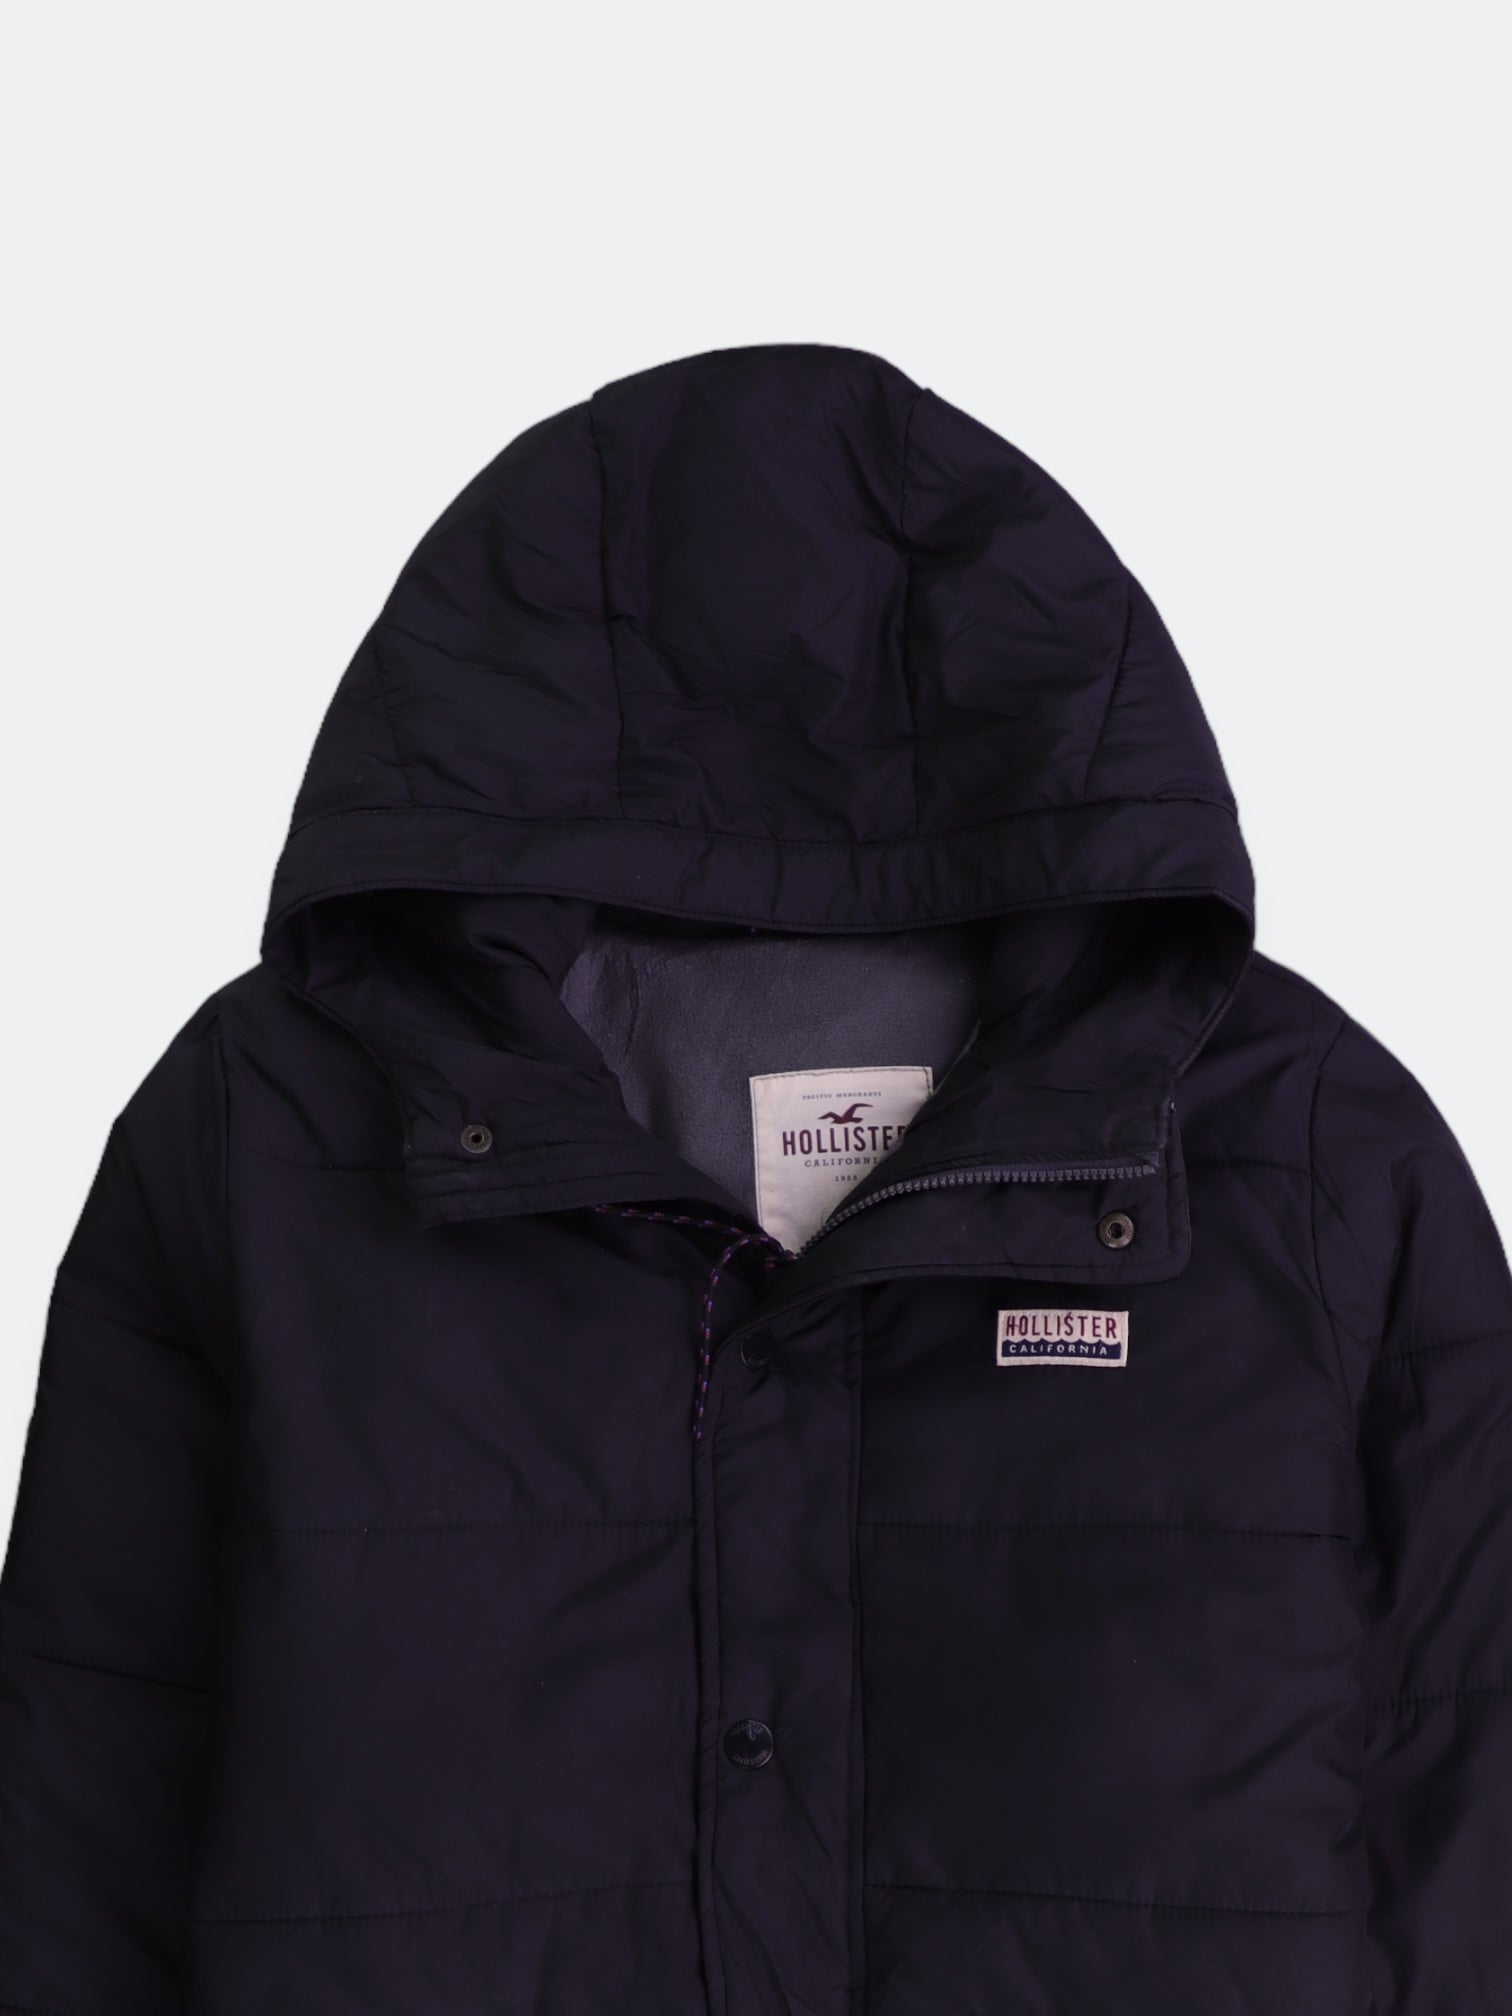 Hollister Chaqueta Puffer Impermeable - Hombre - Small